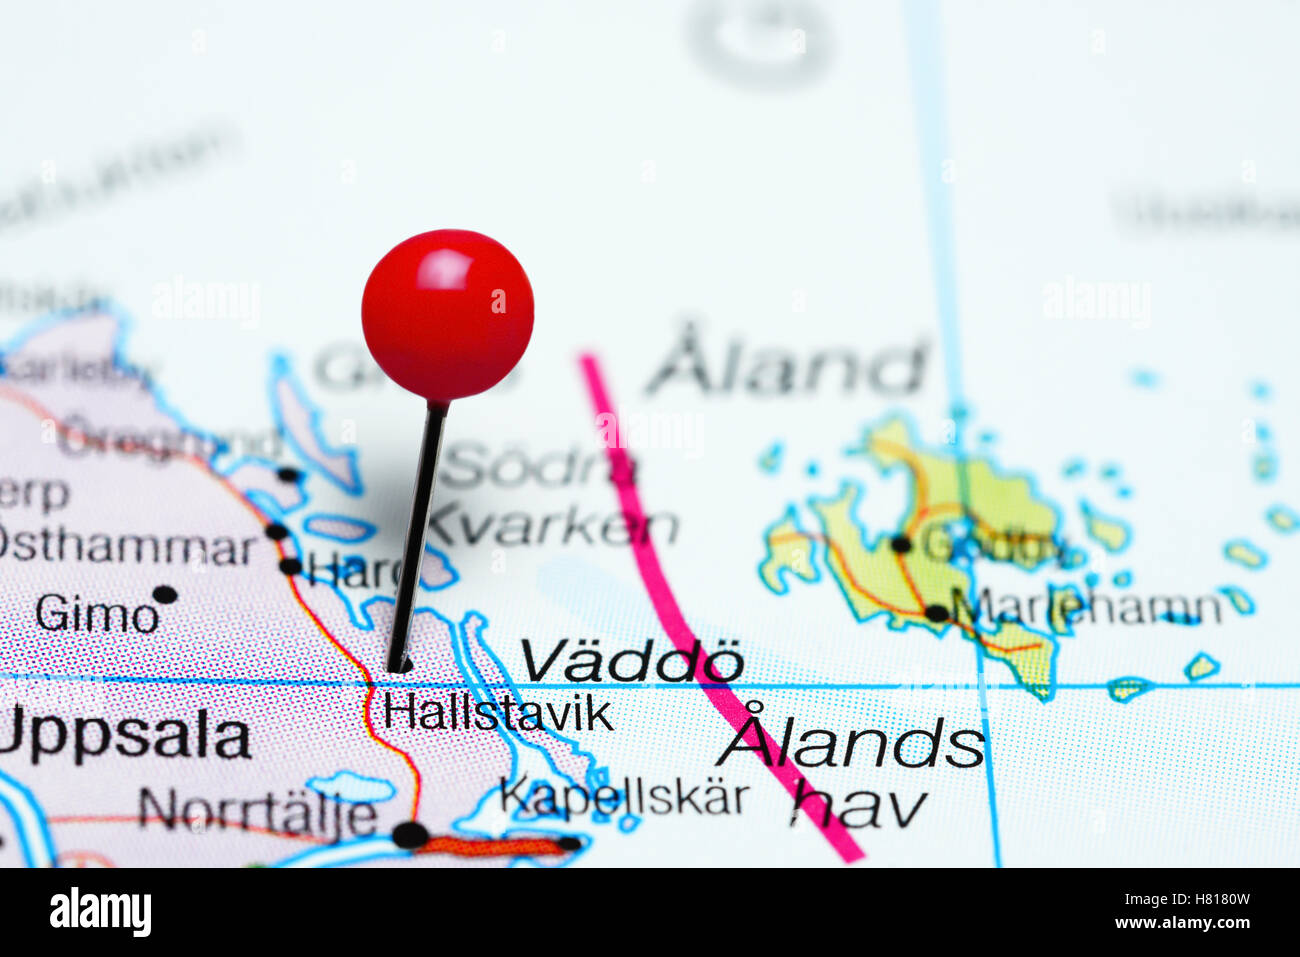 Hallstavik pinned on a map of Sweden Stock Photo